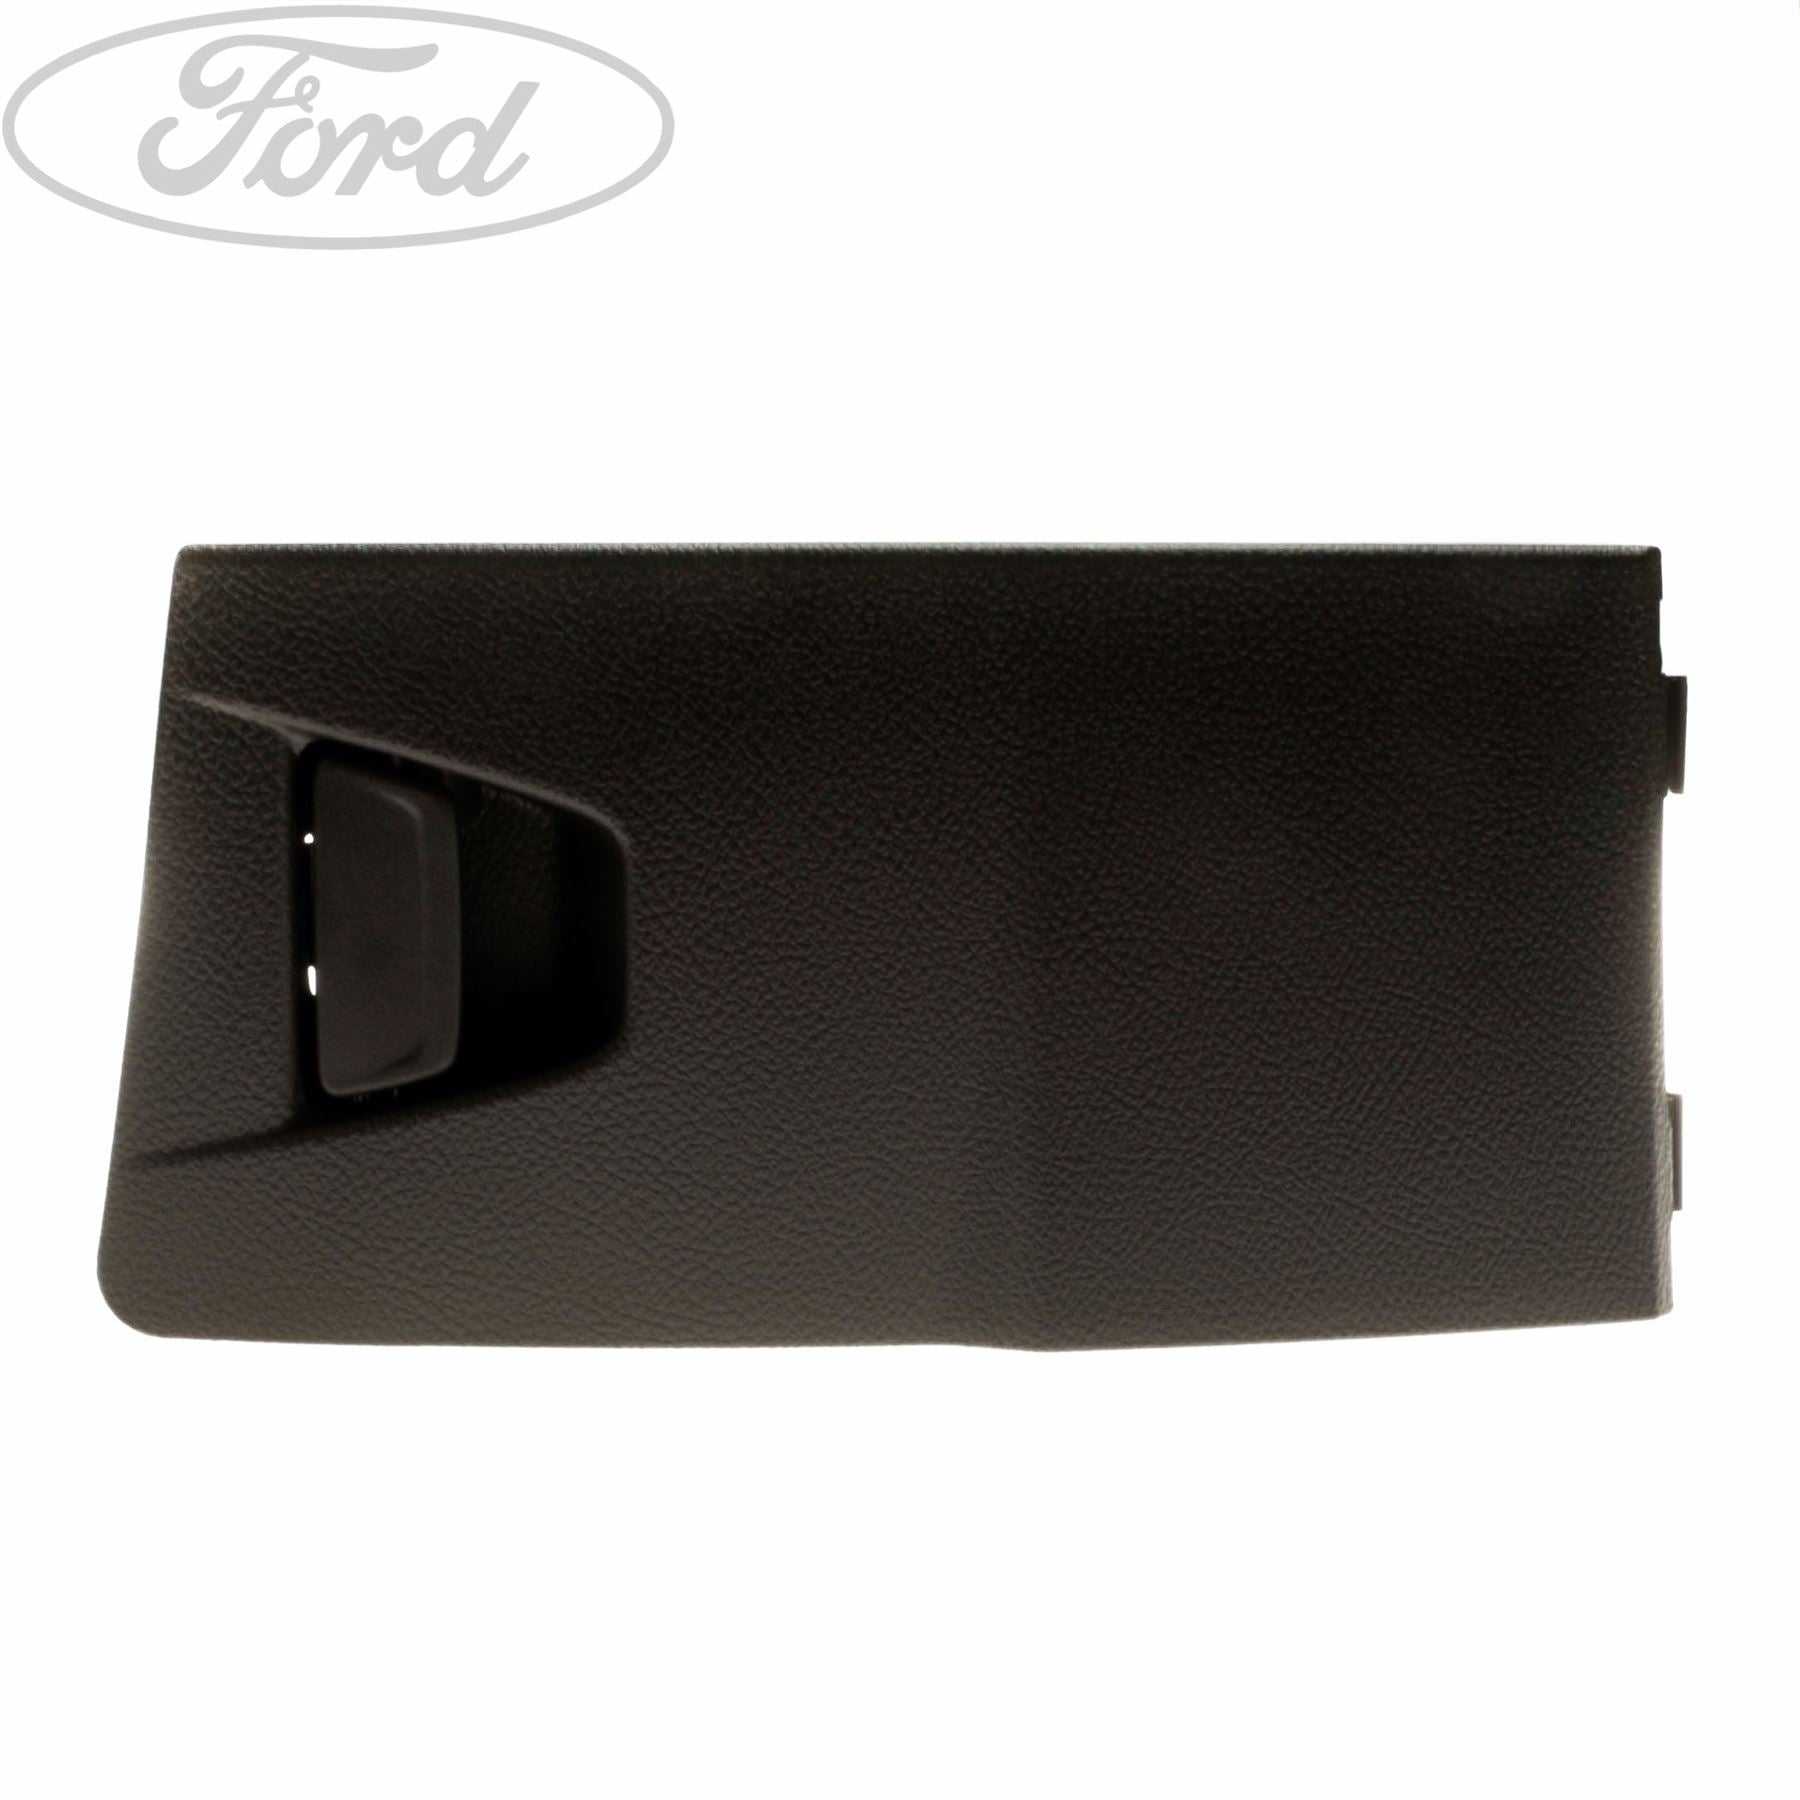 Ford, STOWAGE BOX